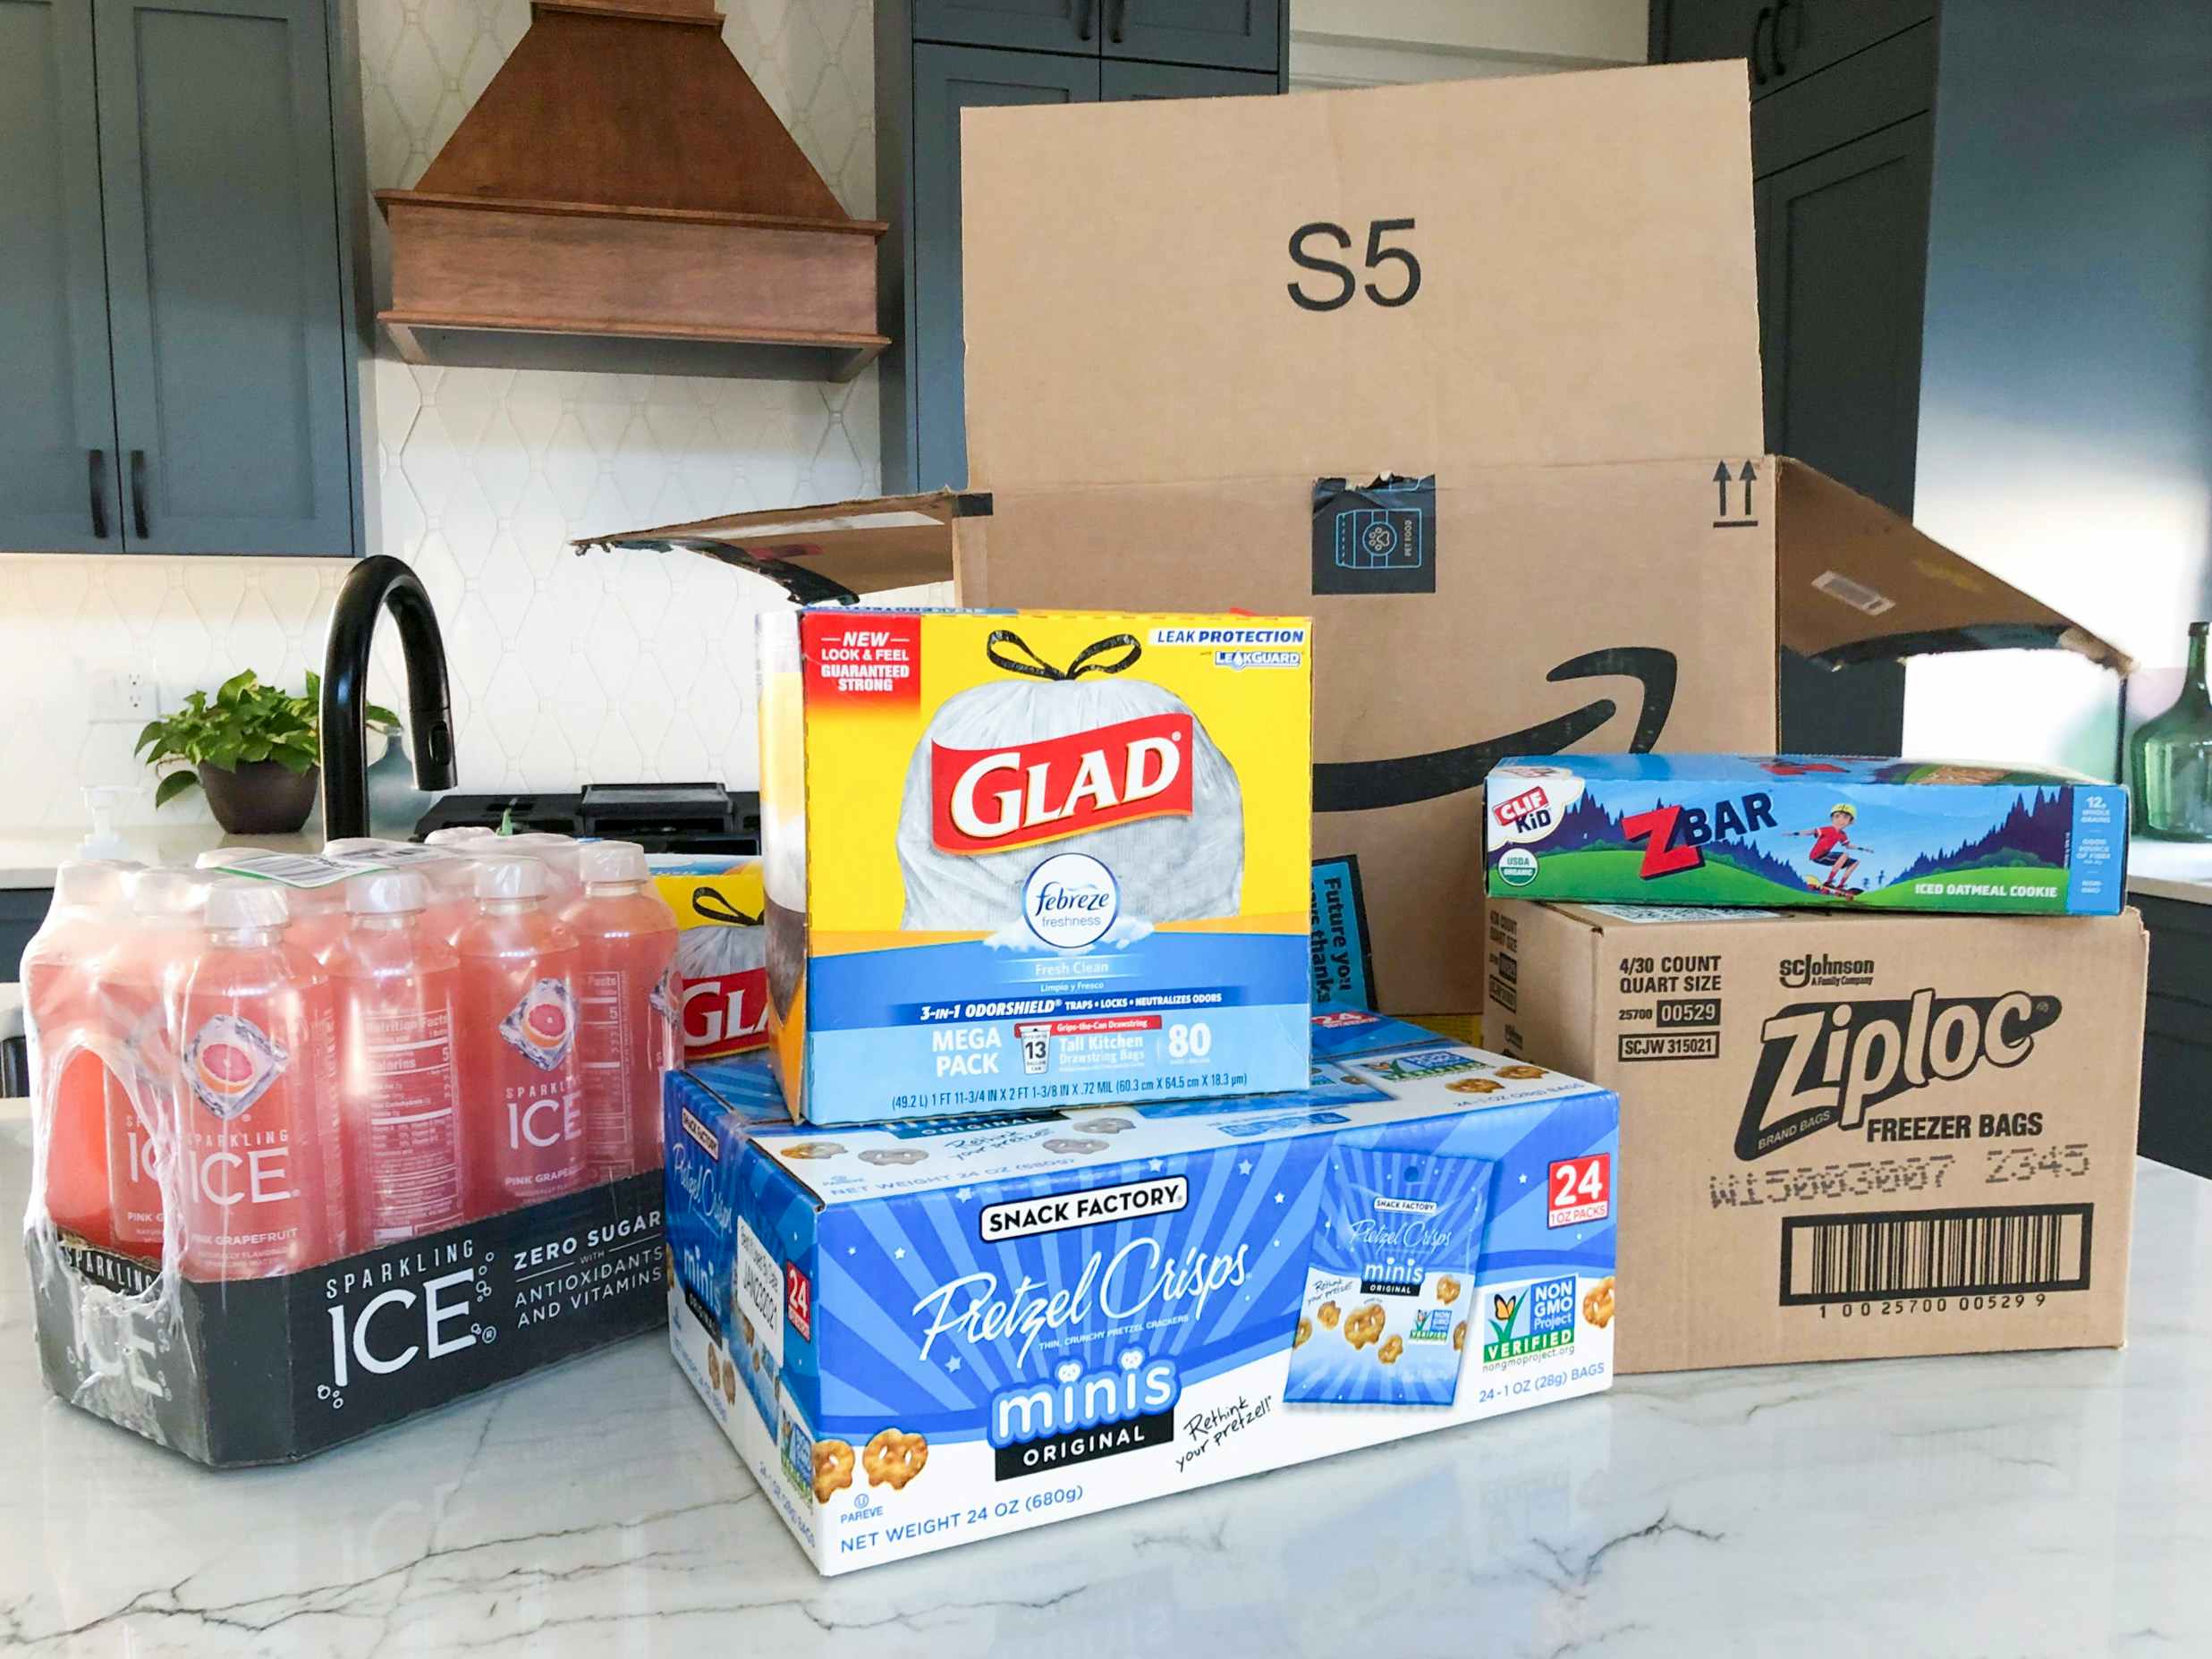 A box of Glad garbage bags, a case of ICE sparkling drinks, a box of pretzel snack bags, a box of ziplock bags, and a box of Zbars sitting on a counter in front of an Amazon Prime box.